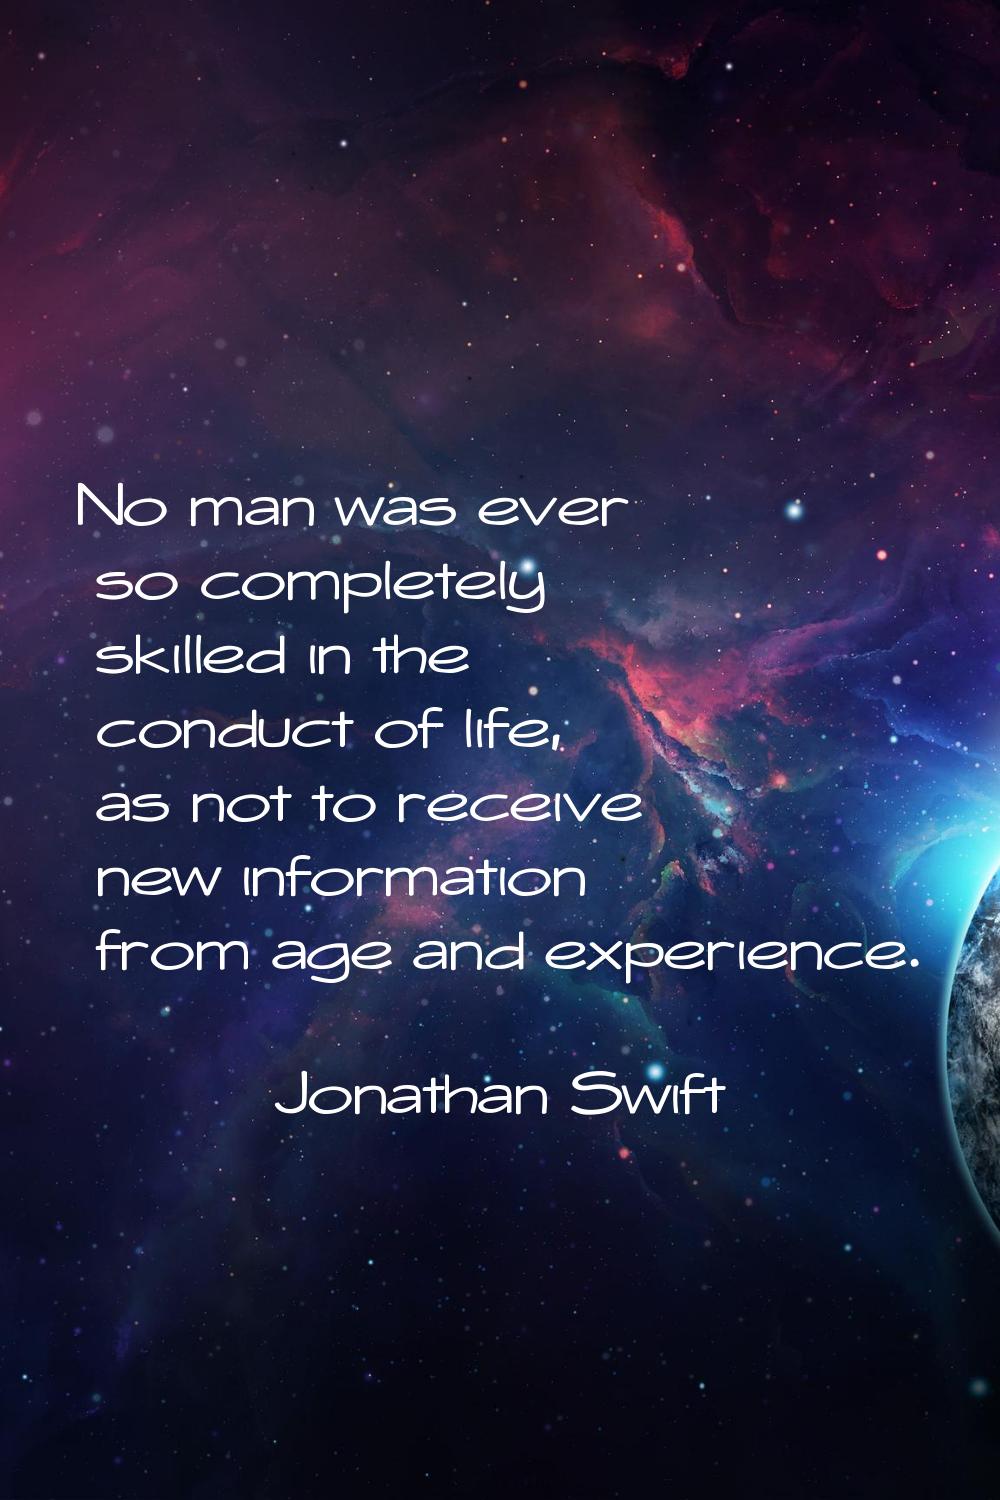 No man was ever so completely skilled in the conduct of life, as not to receive new information fro